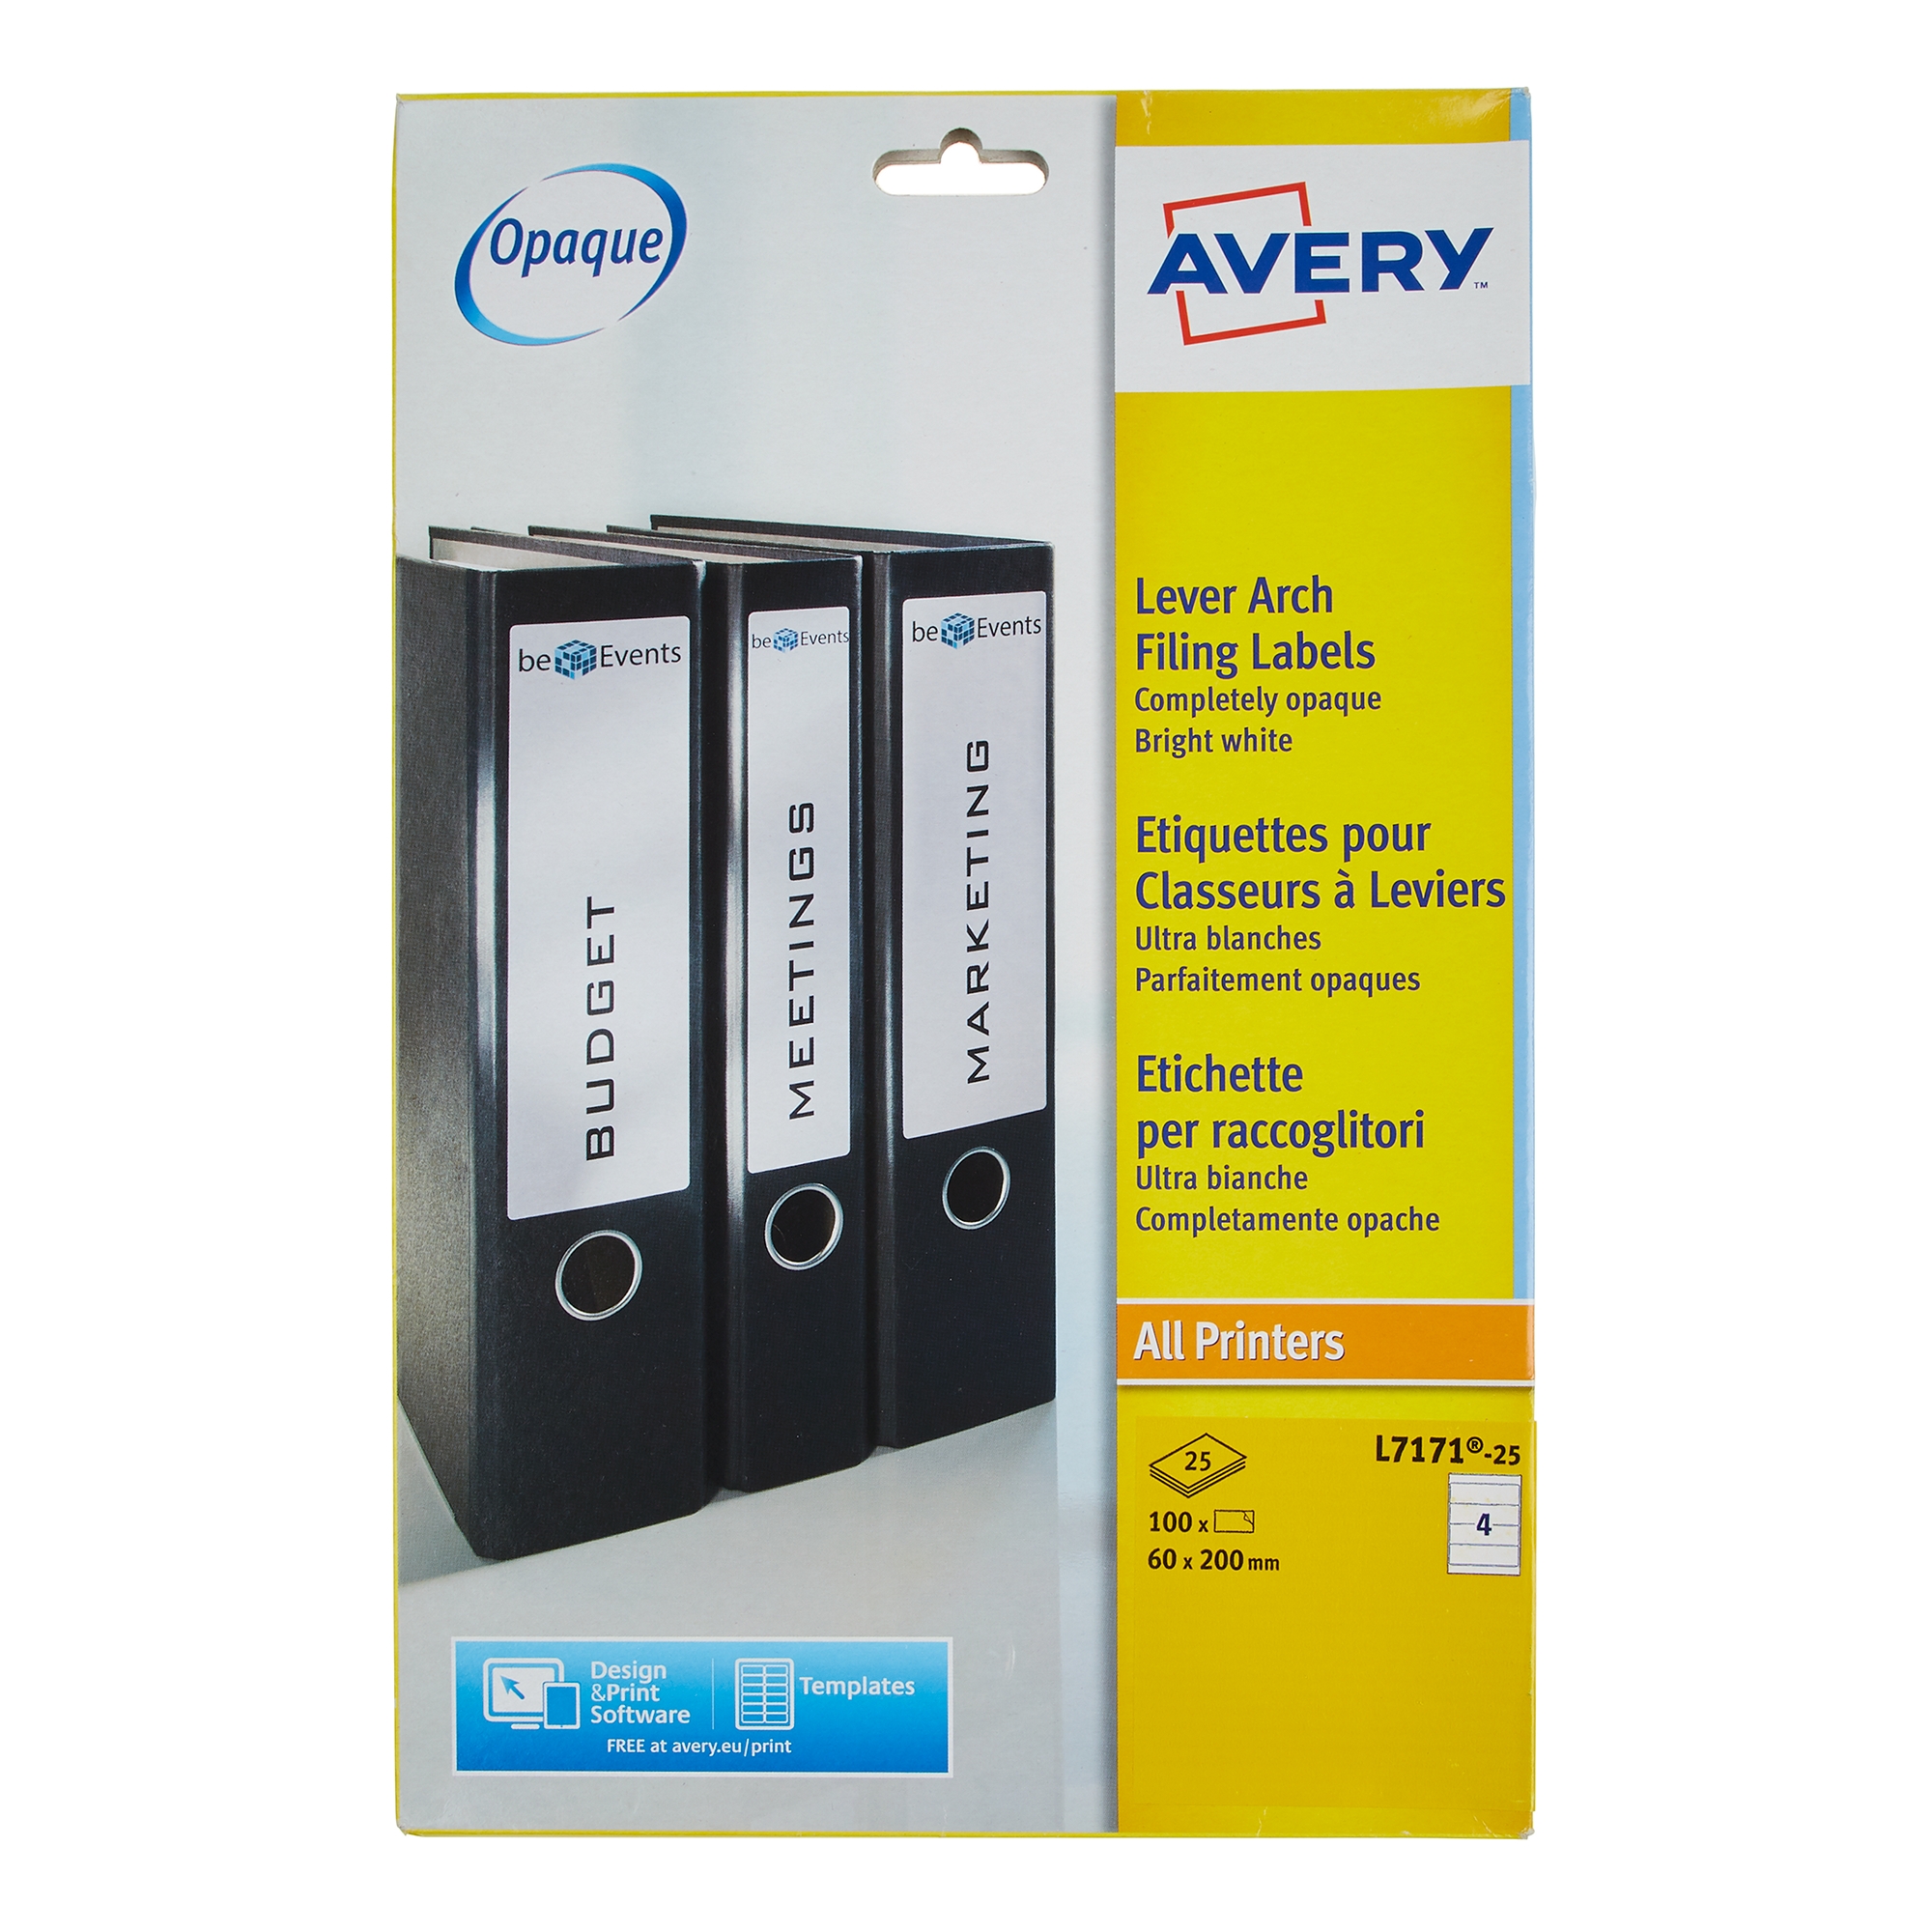 White Avery Lever Arch Filing Labels - Pack of 25 Sheets